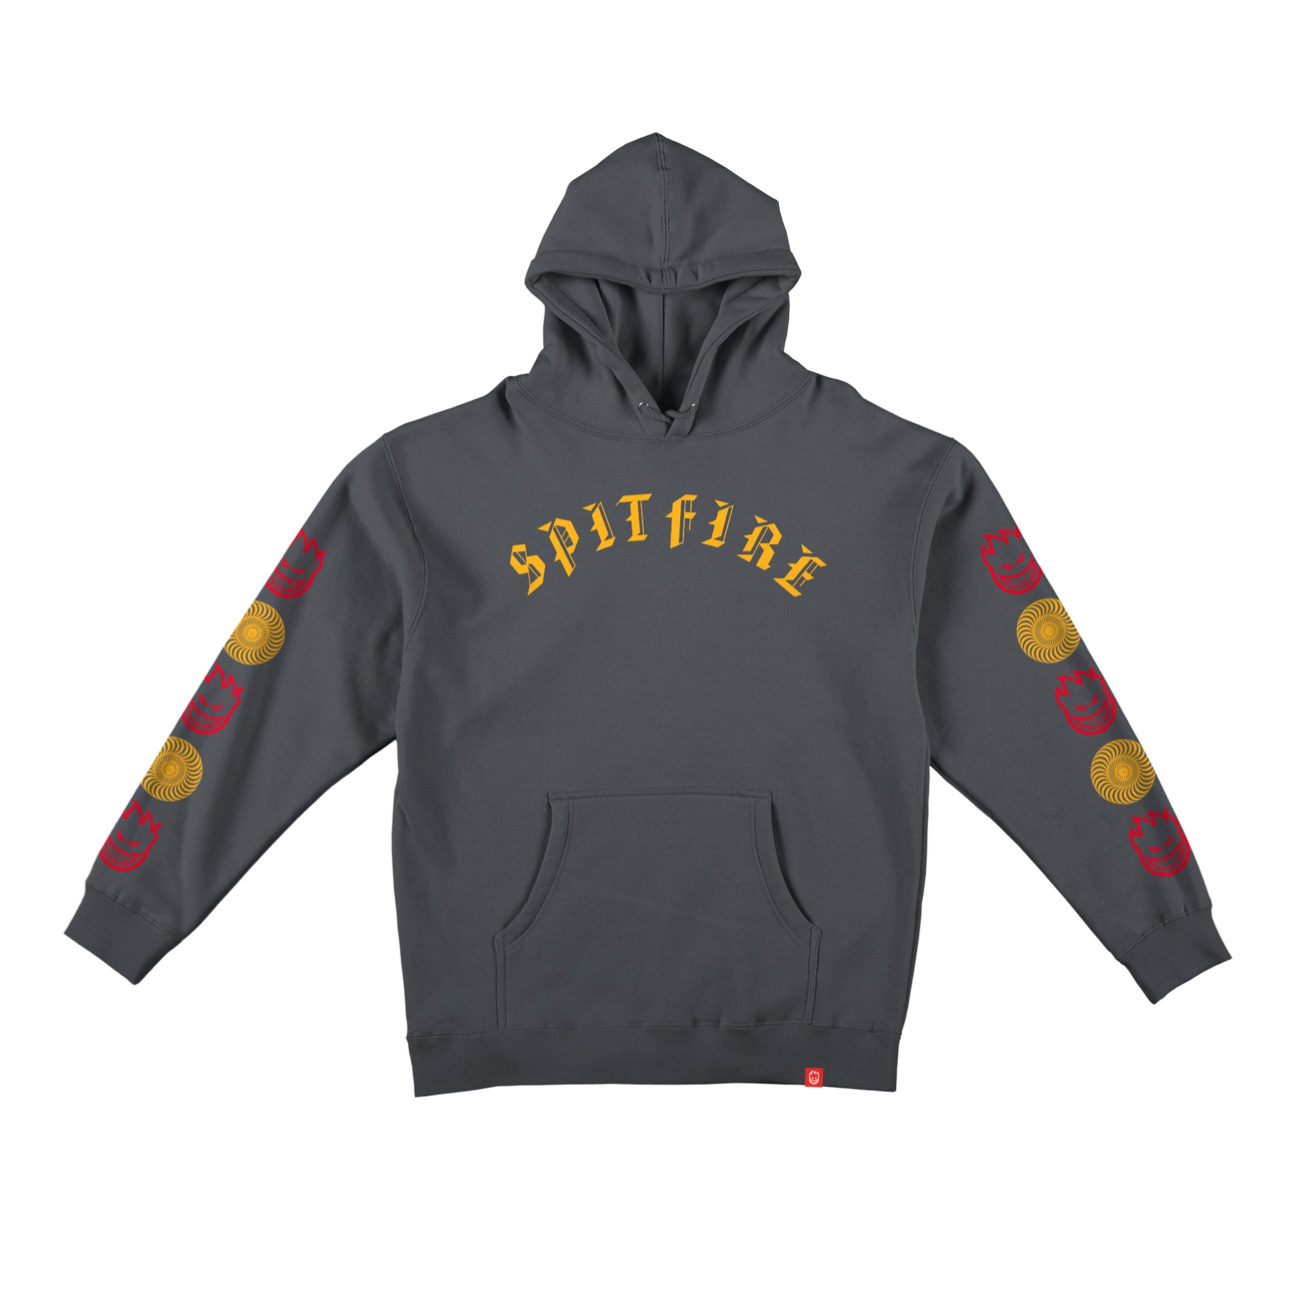 SPITFIRE - OLD E COMBO HOODIE - SILVER/CHARCOAL